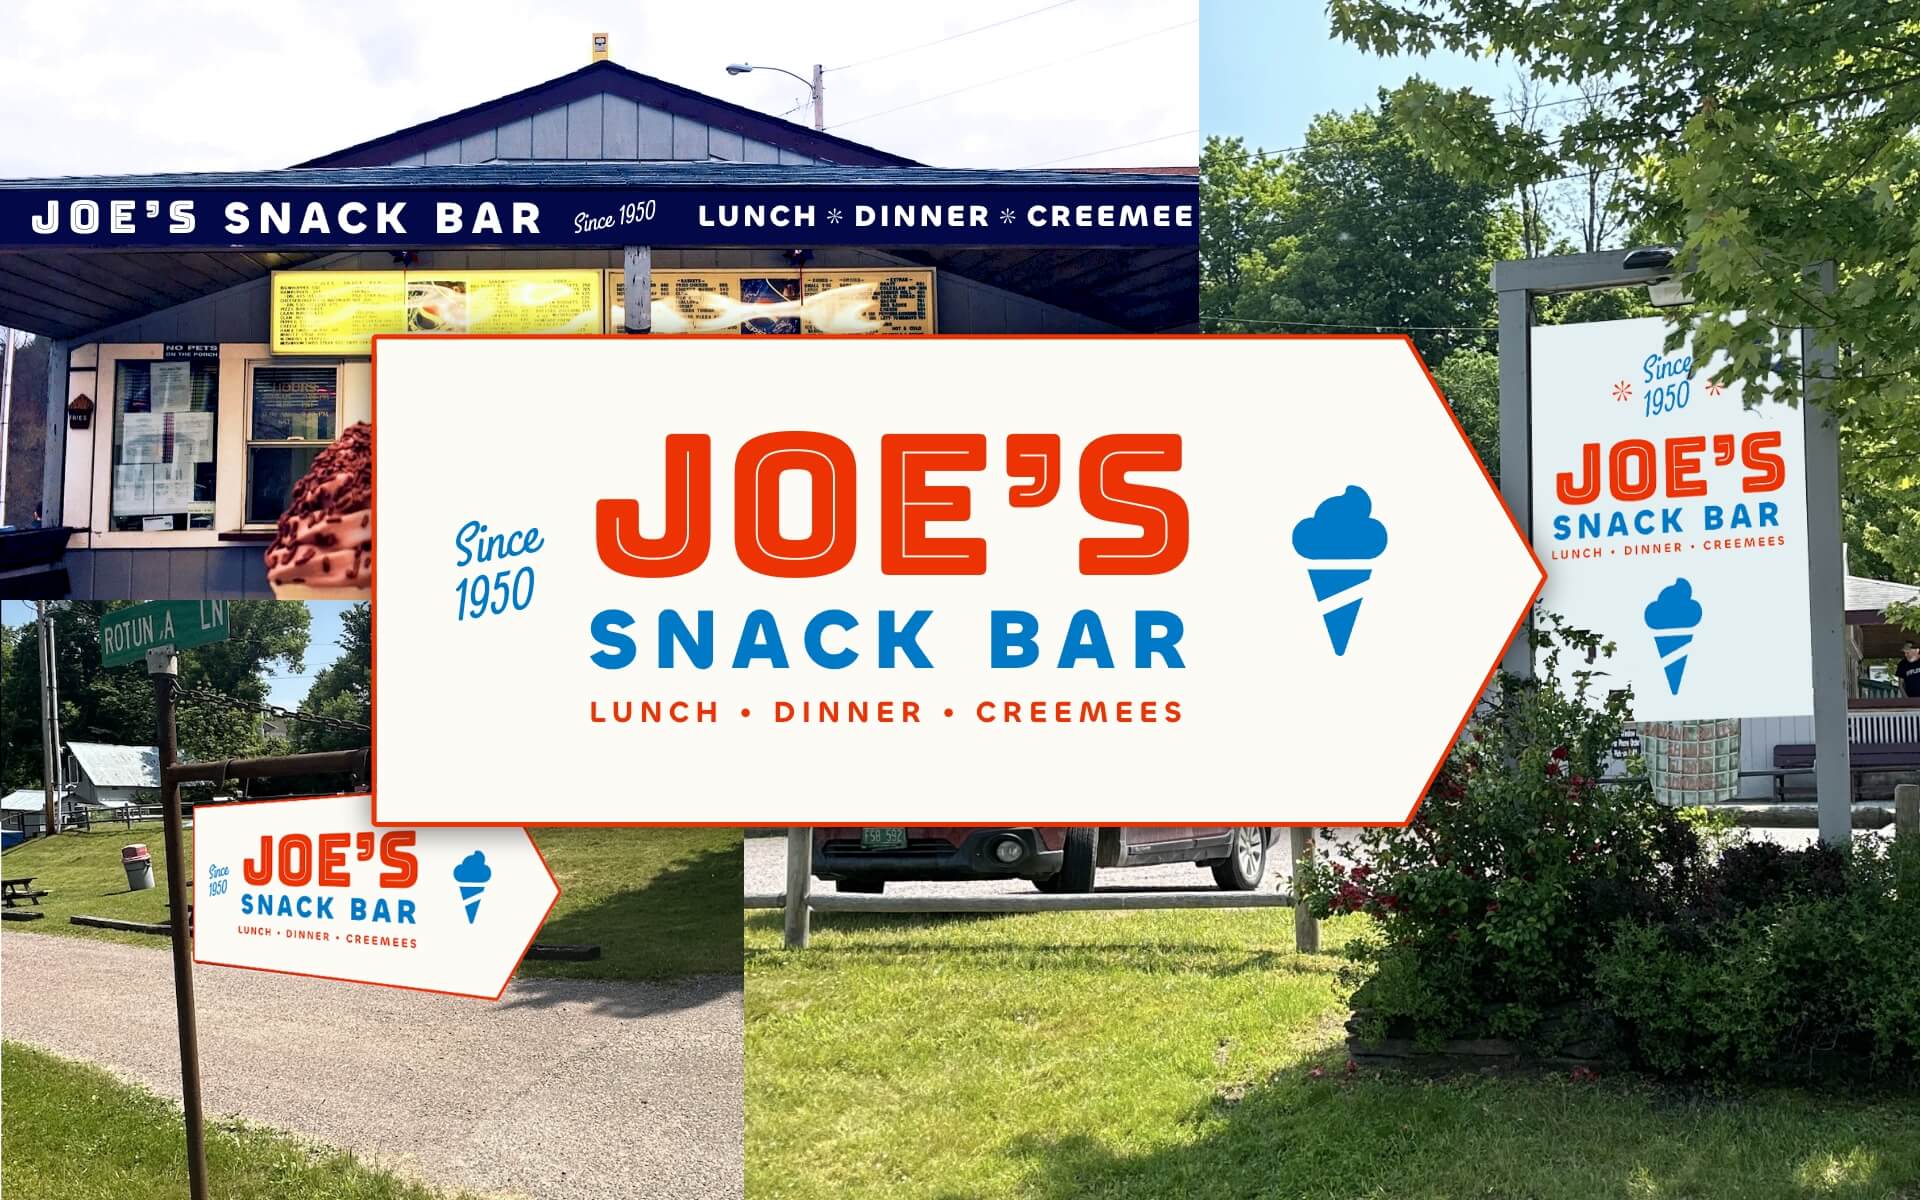 My version of the logo plastered on their front building, parking sign, and road sign, with red white blue, retro fonts, and icecream clipart.